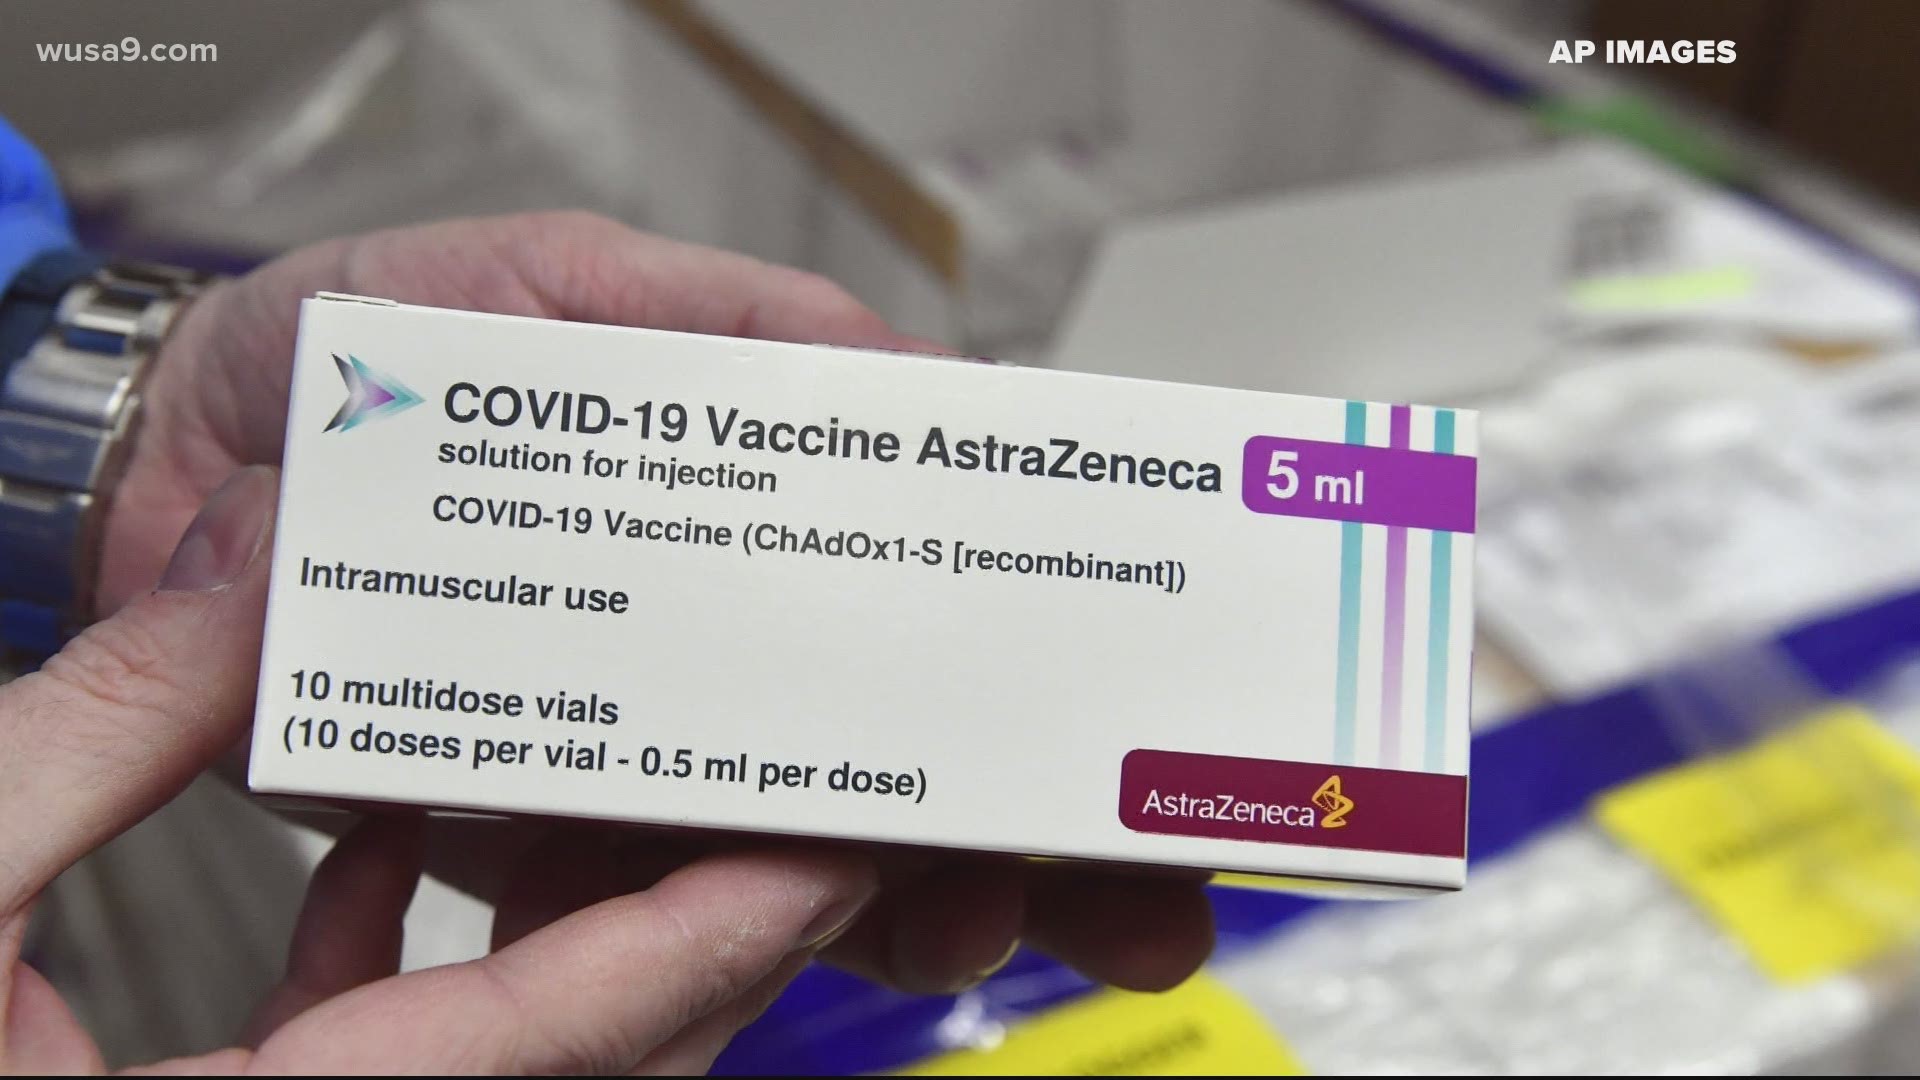 The Verify team asked the experts for an update on AstraZeneca's COVID-19 vaccine